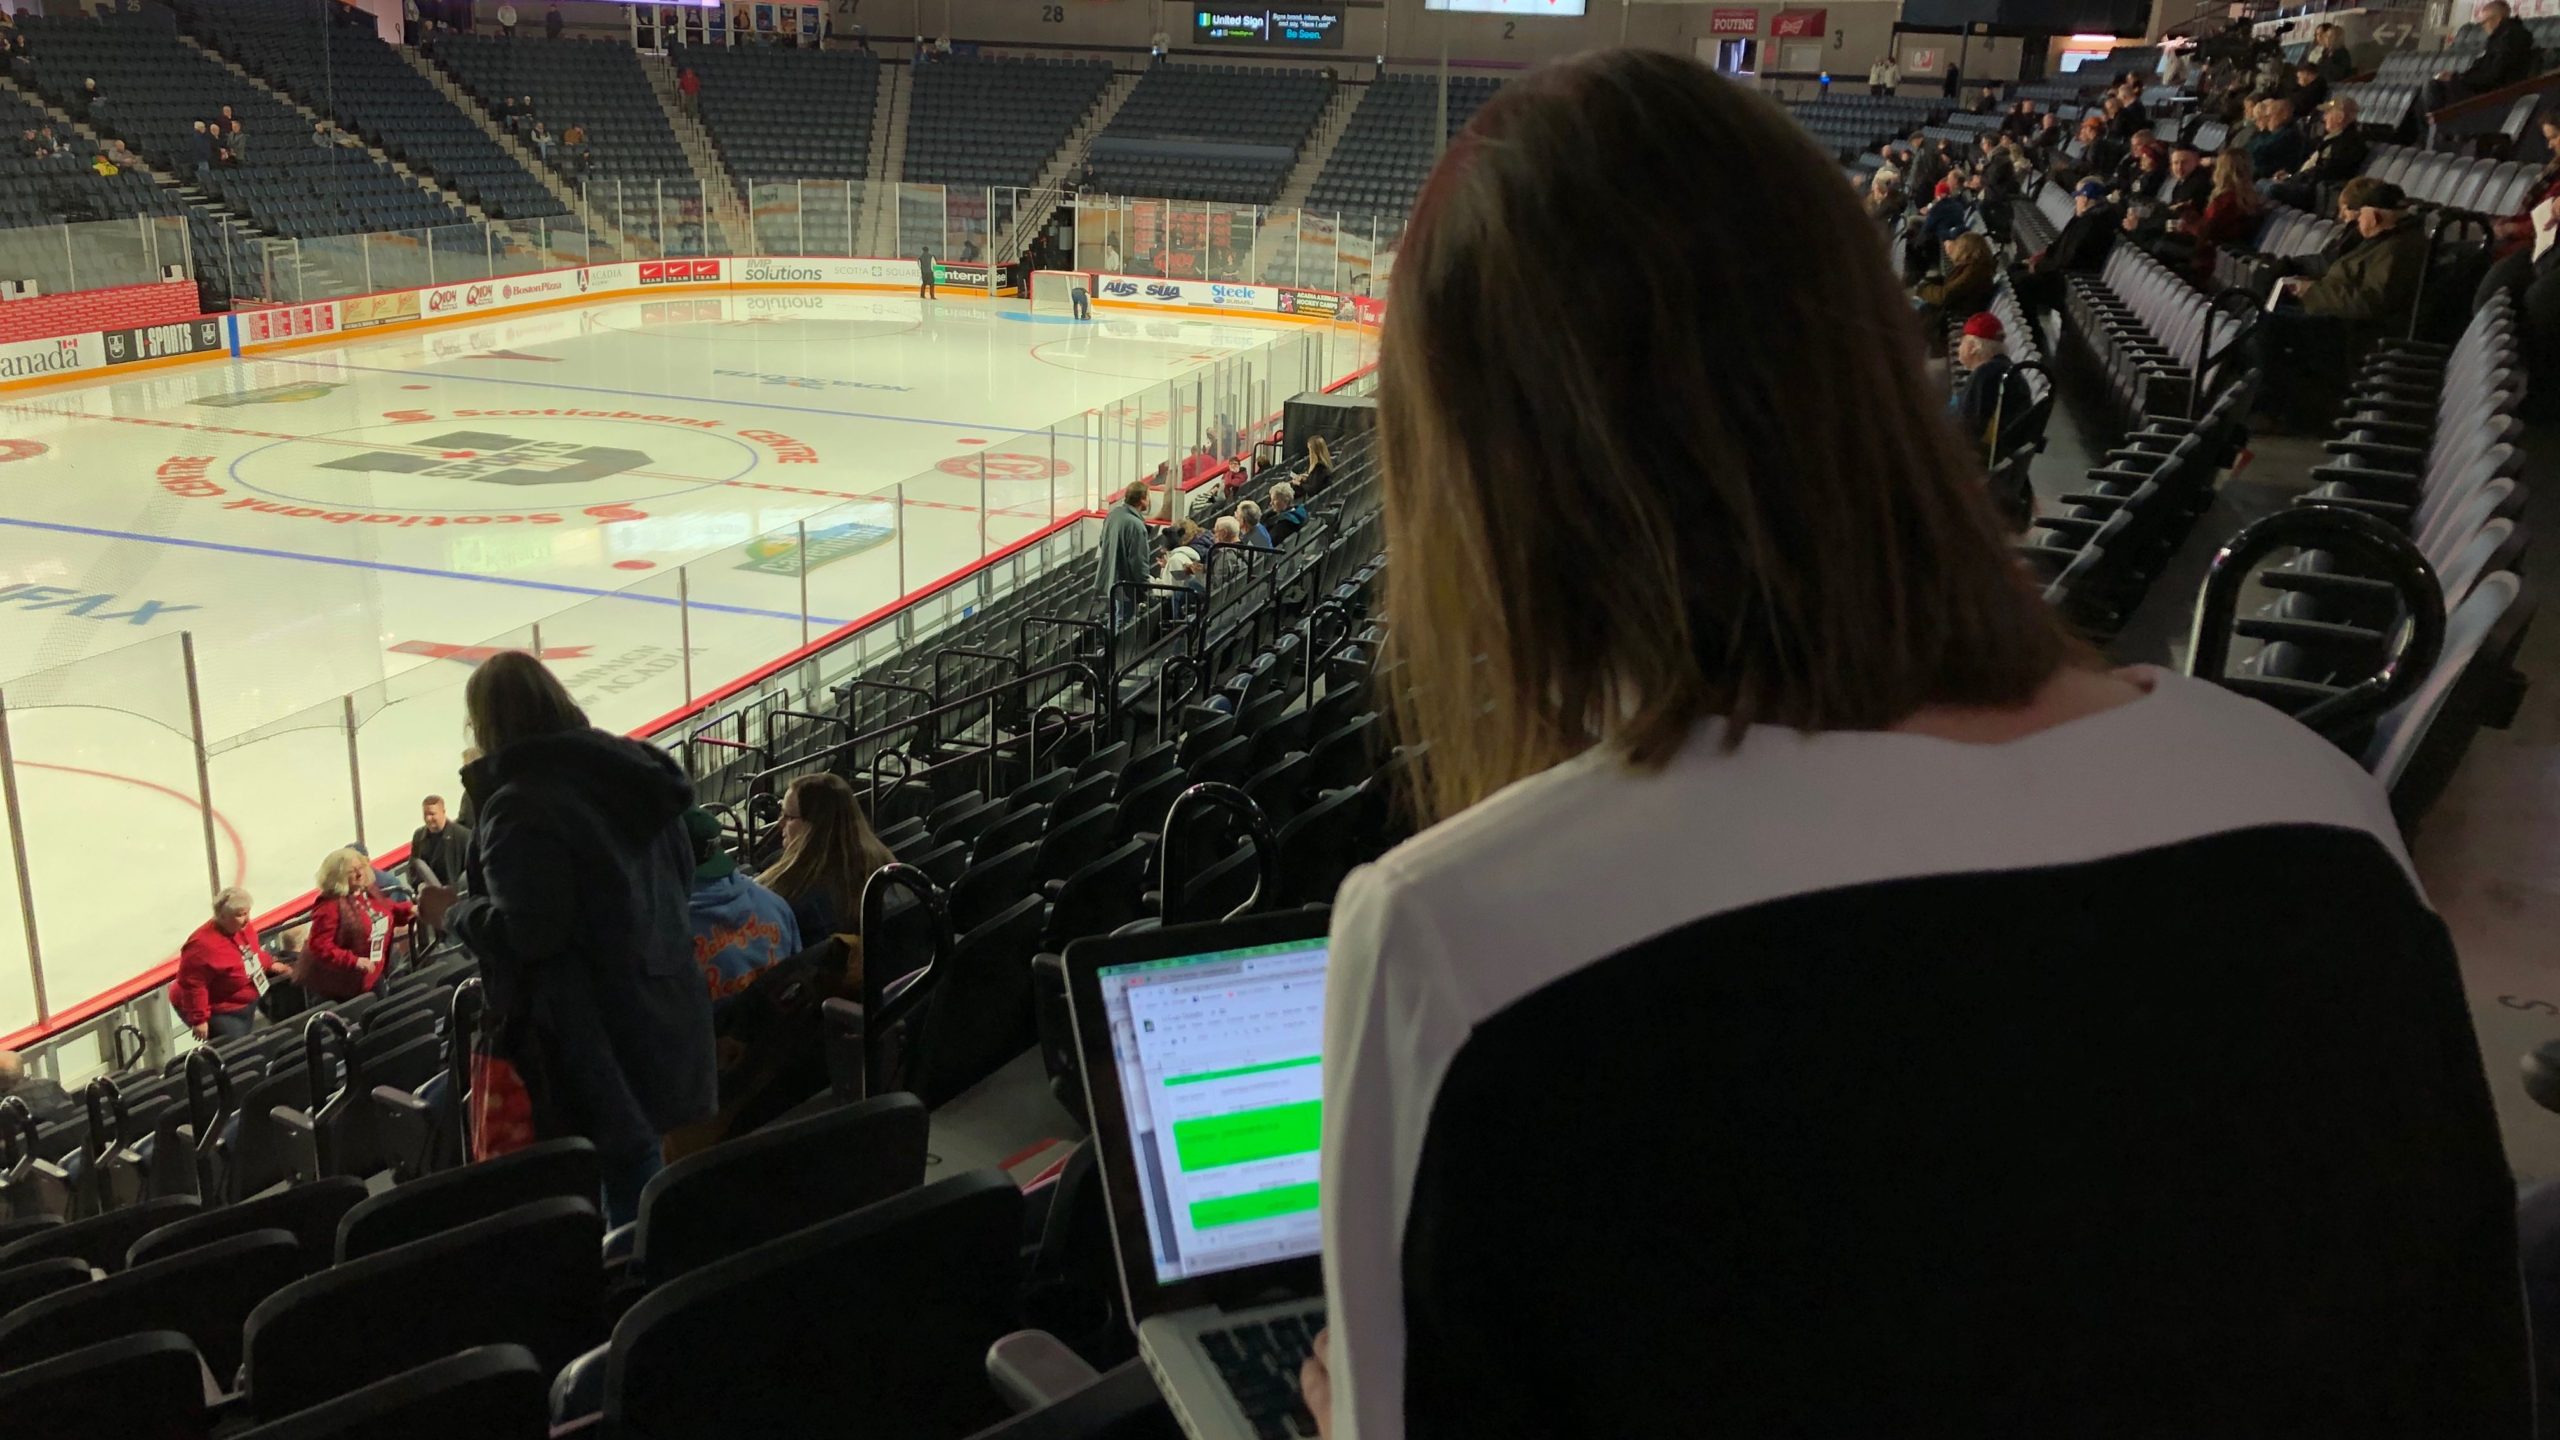 Before the puck drops, Rhéa Koivu catches up on emails. 